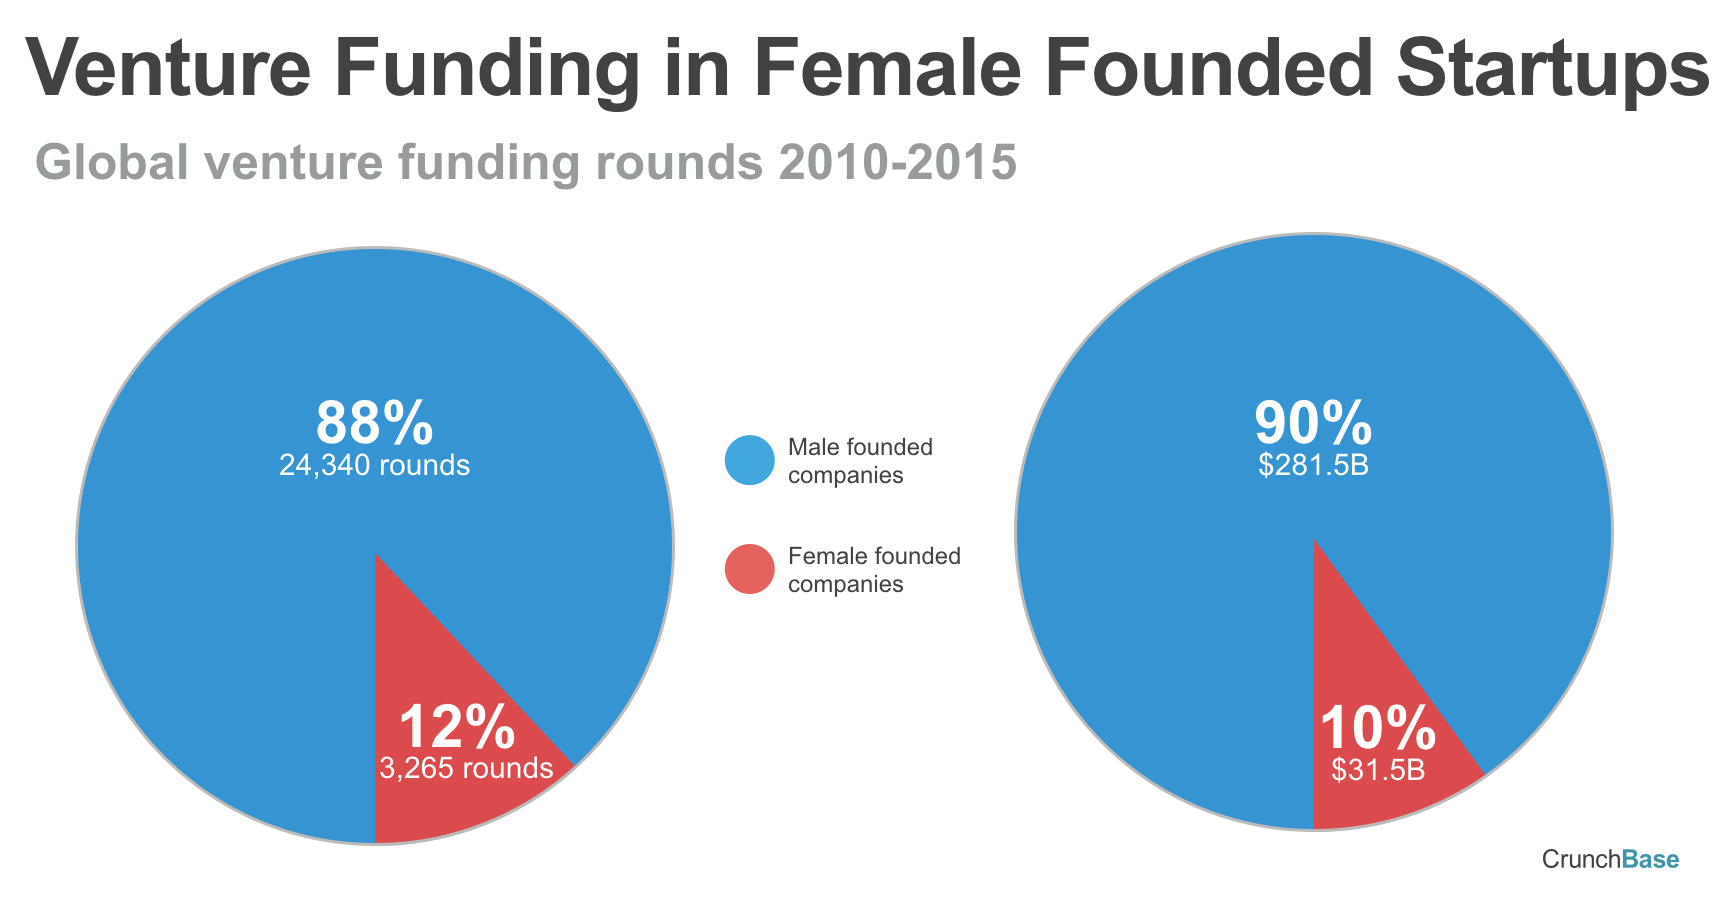 Venture Funding Rounds in Female Funded Startups